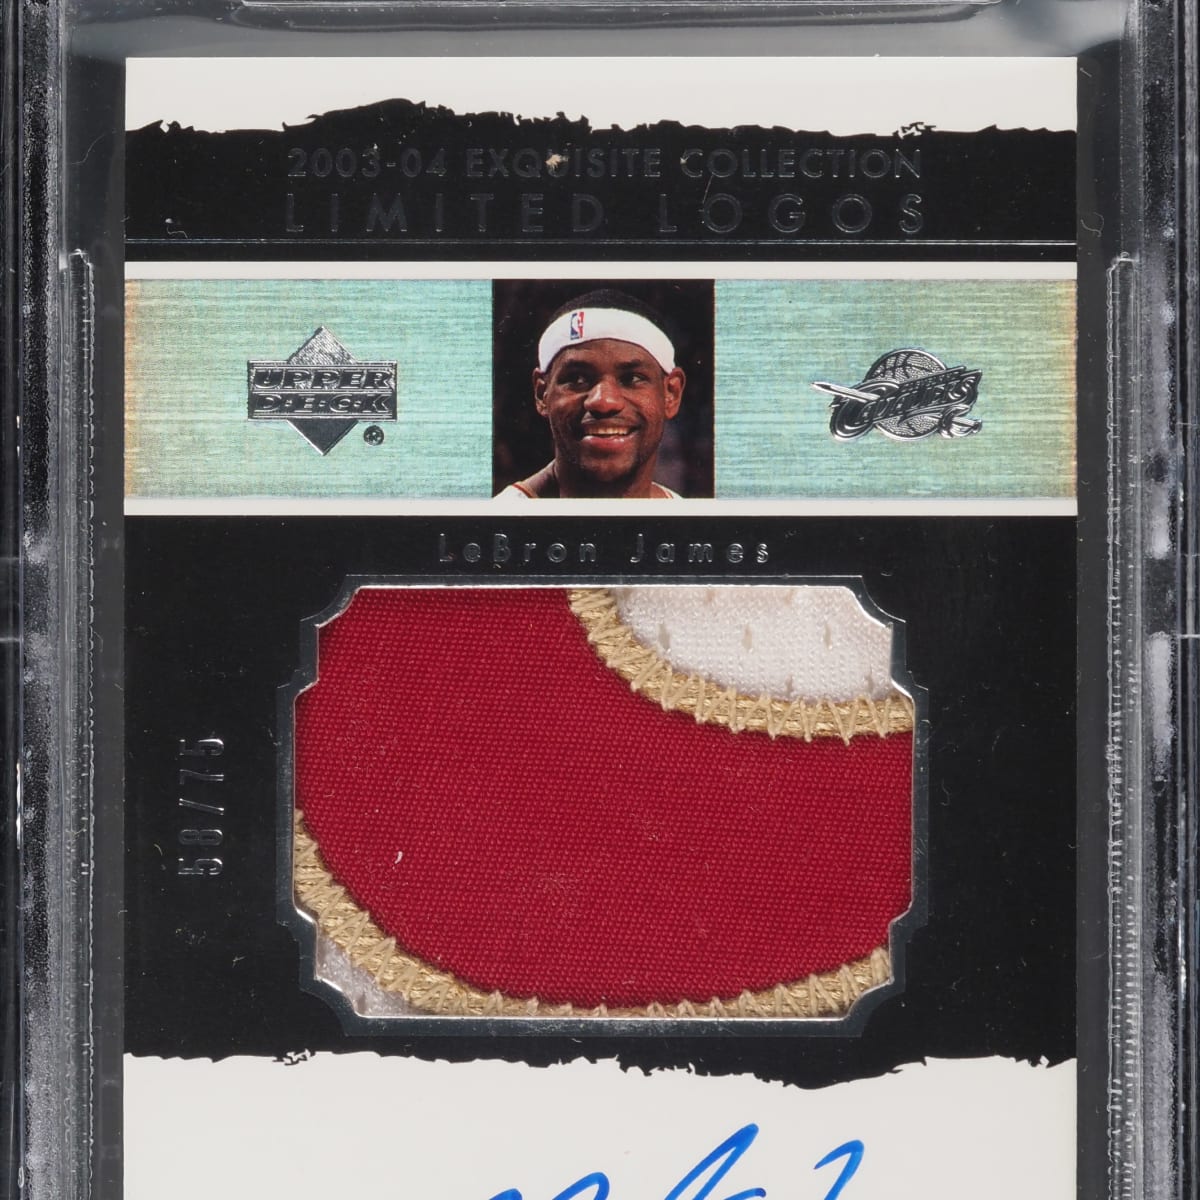 LeBron James rookie card expected to command high price in PWCC 